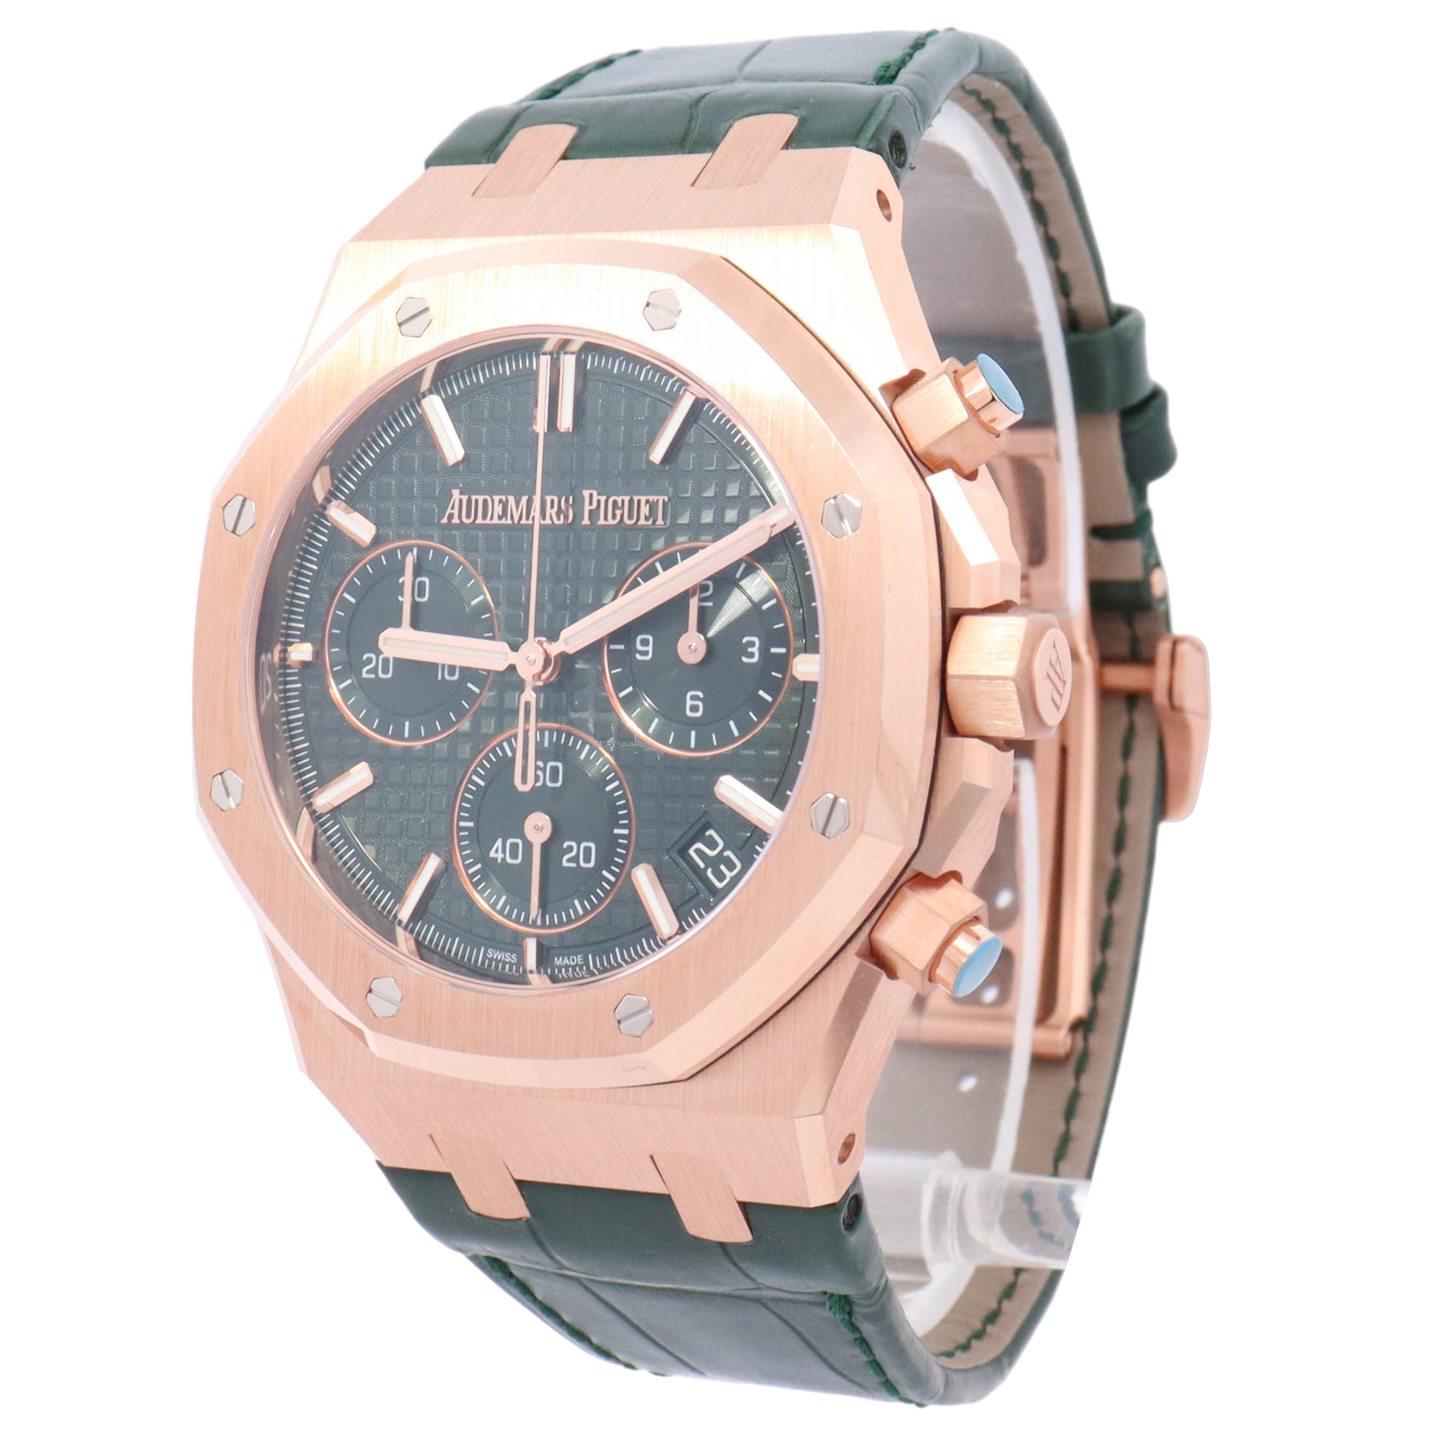 Audemars Piguet Royal Oak 41mm Rose Gold Green Chronograph Dial Watch Reference# 26240OR.OO.D404CR.02 - Happy Jewelers Fine Jewelry Lifetime Warranty